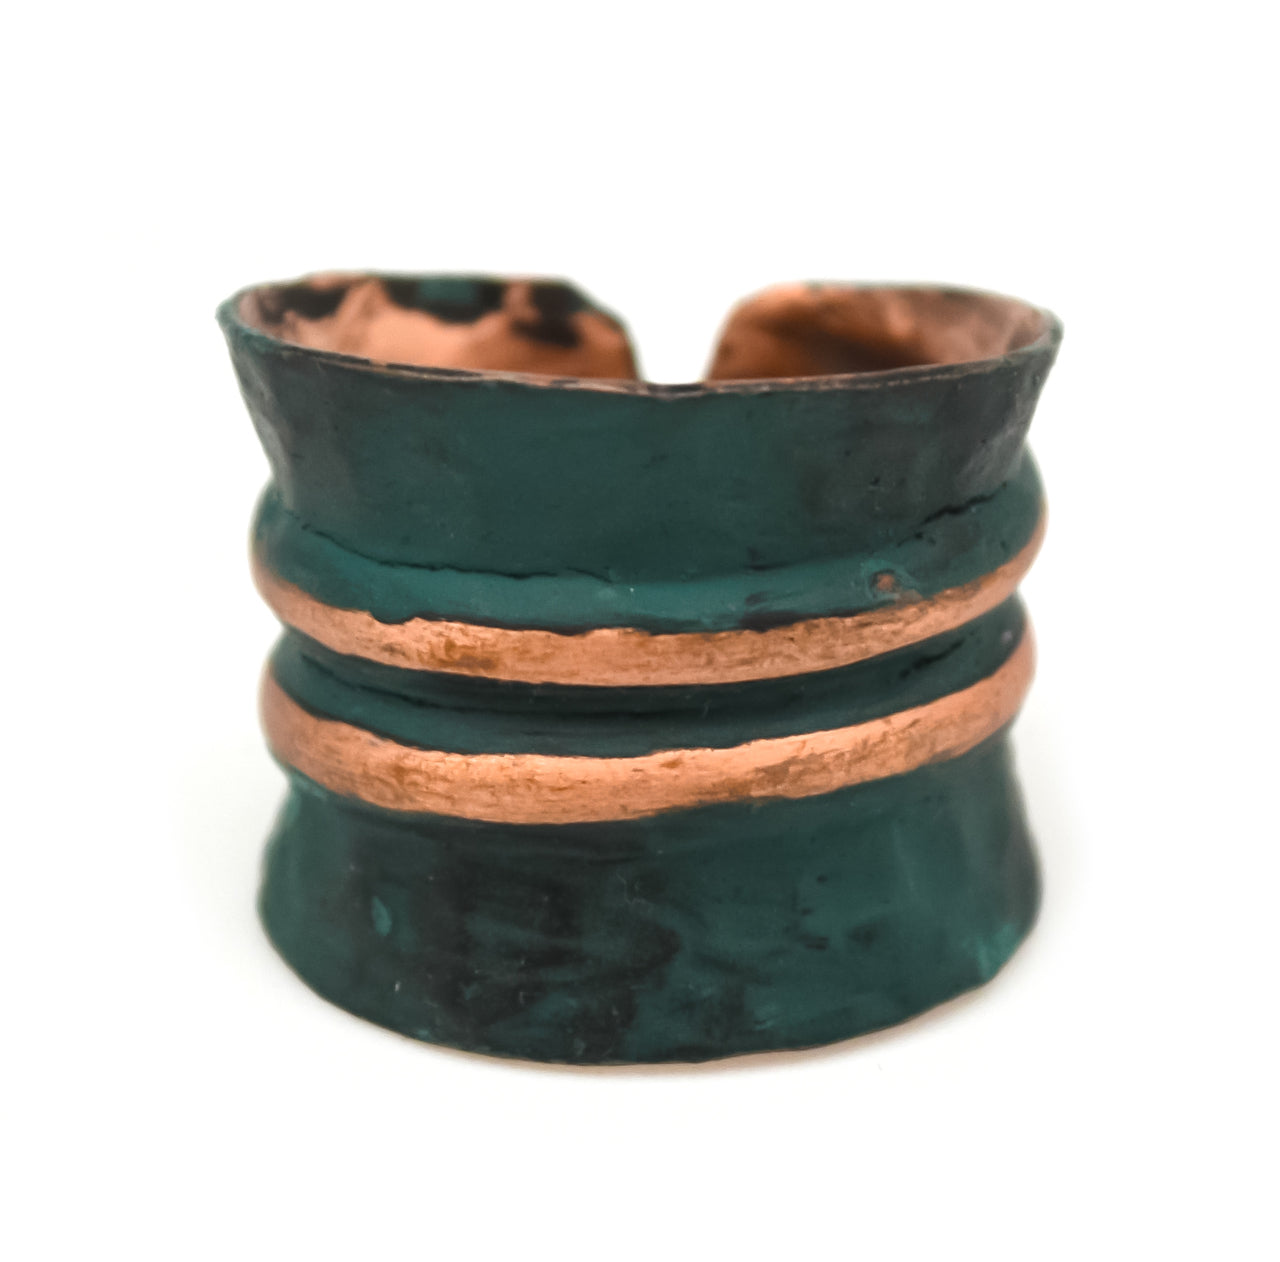 Copper Patina Ring 287 (RP287)